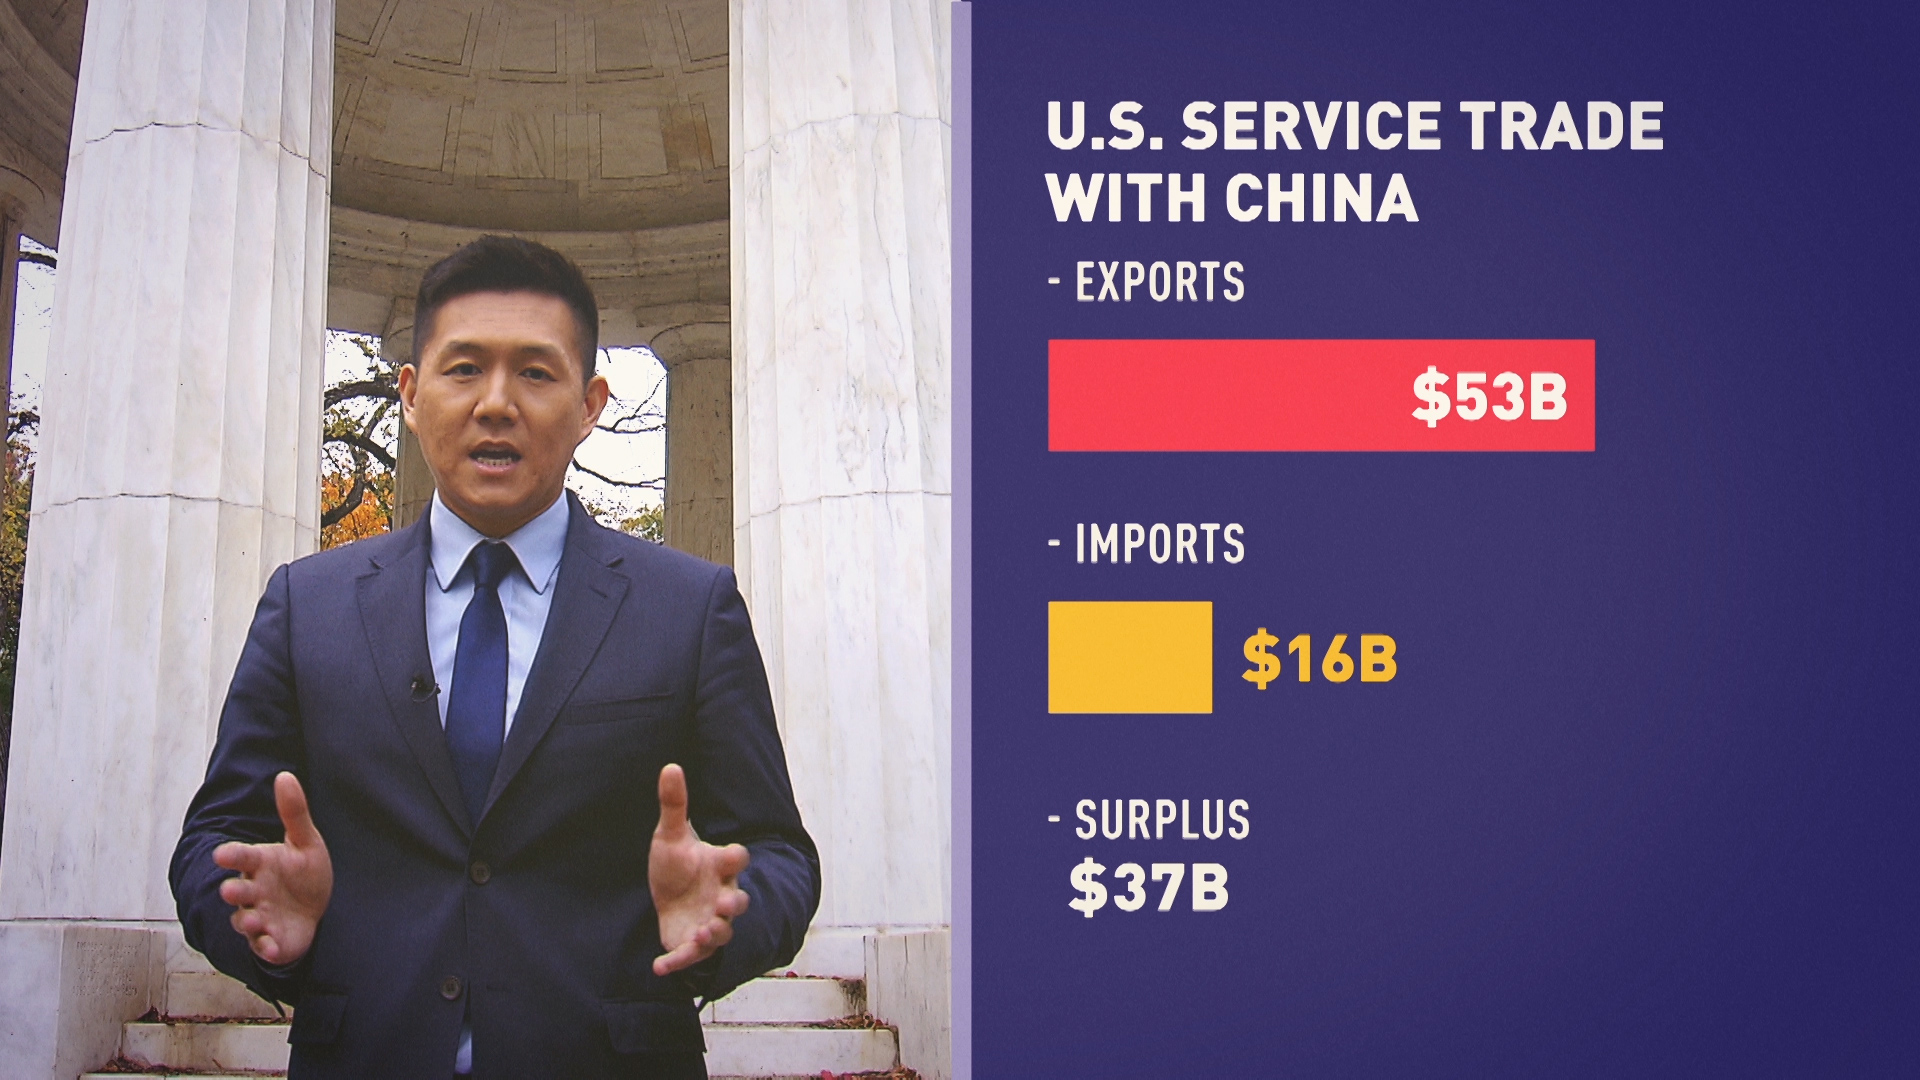 Here’s what people don’t say about the US trade deficit with China